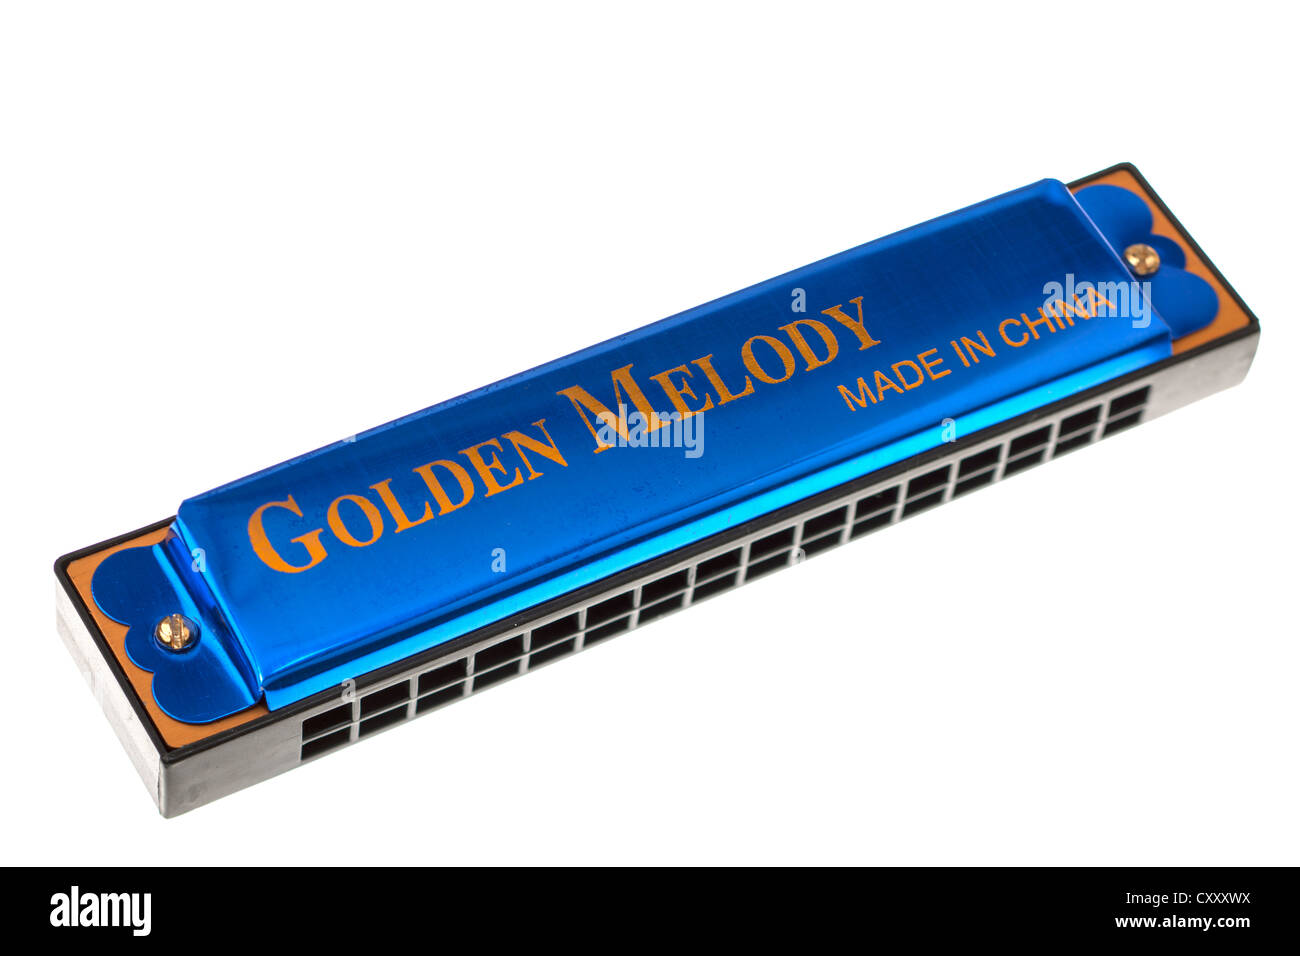 16 hole harmonica Golden Melody made in China Stock Photo ...